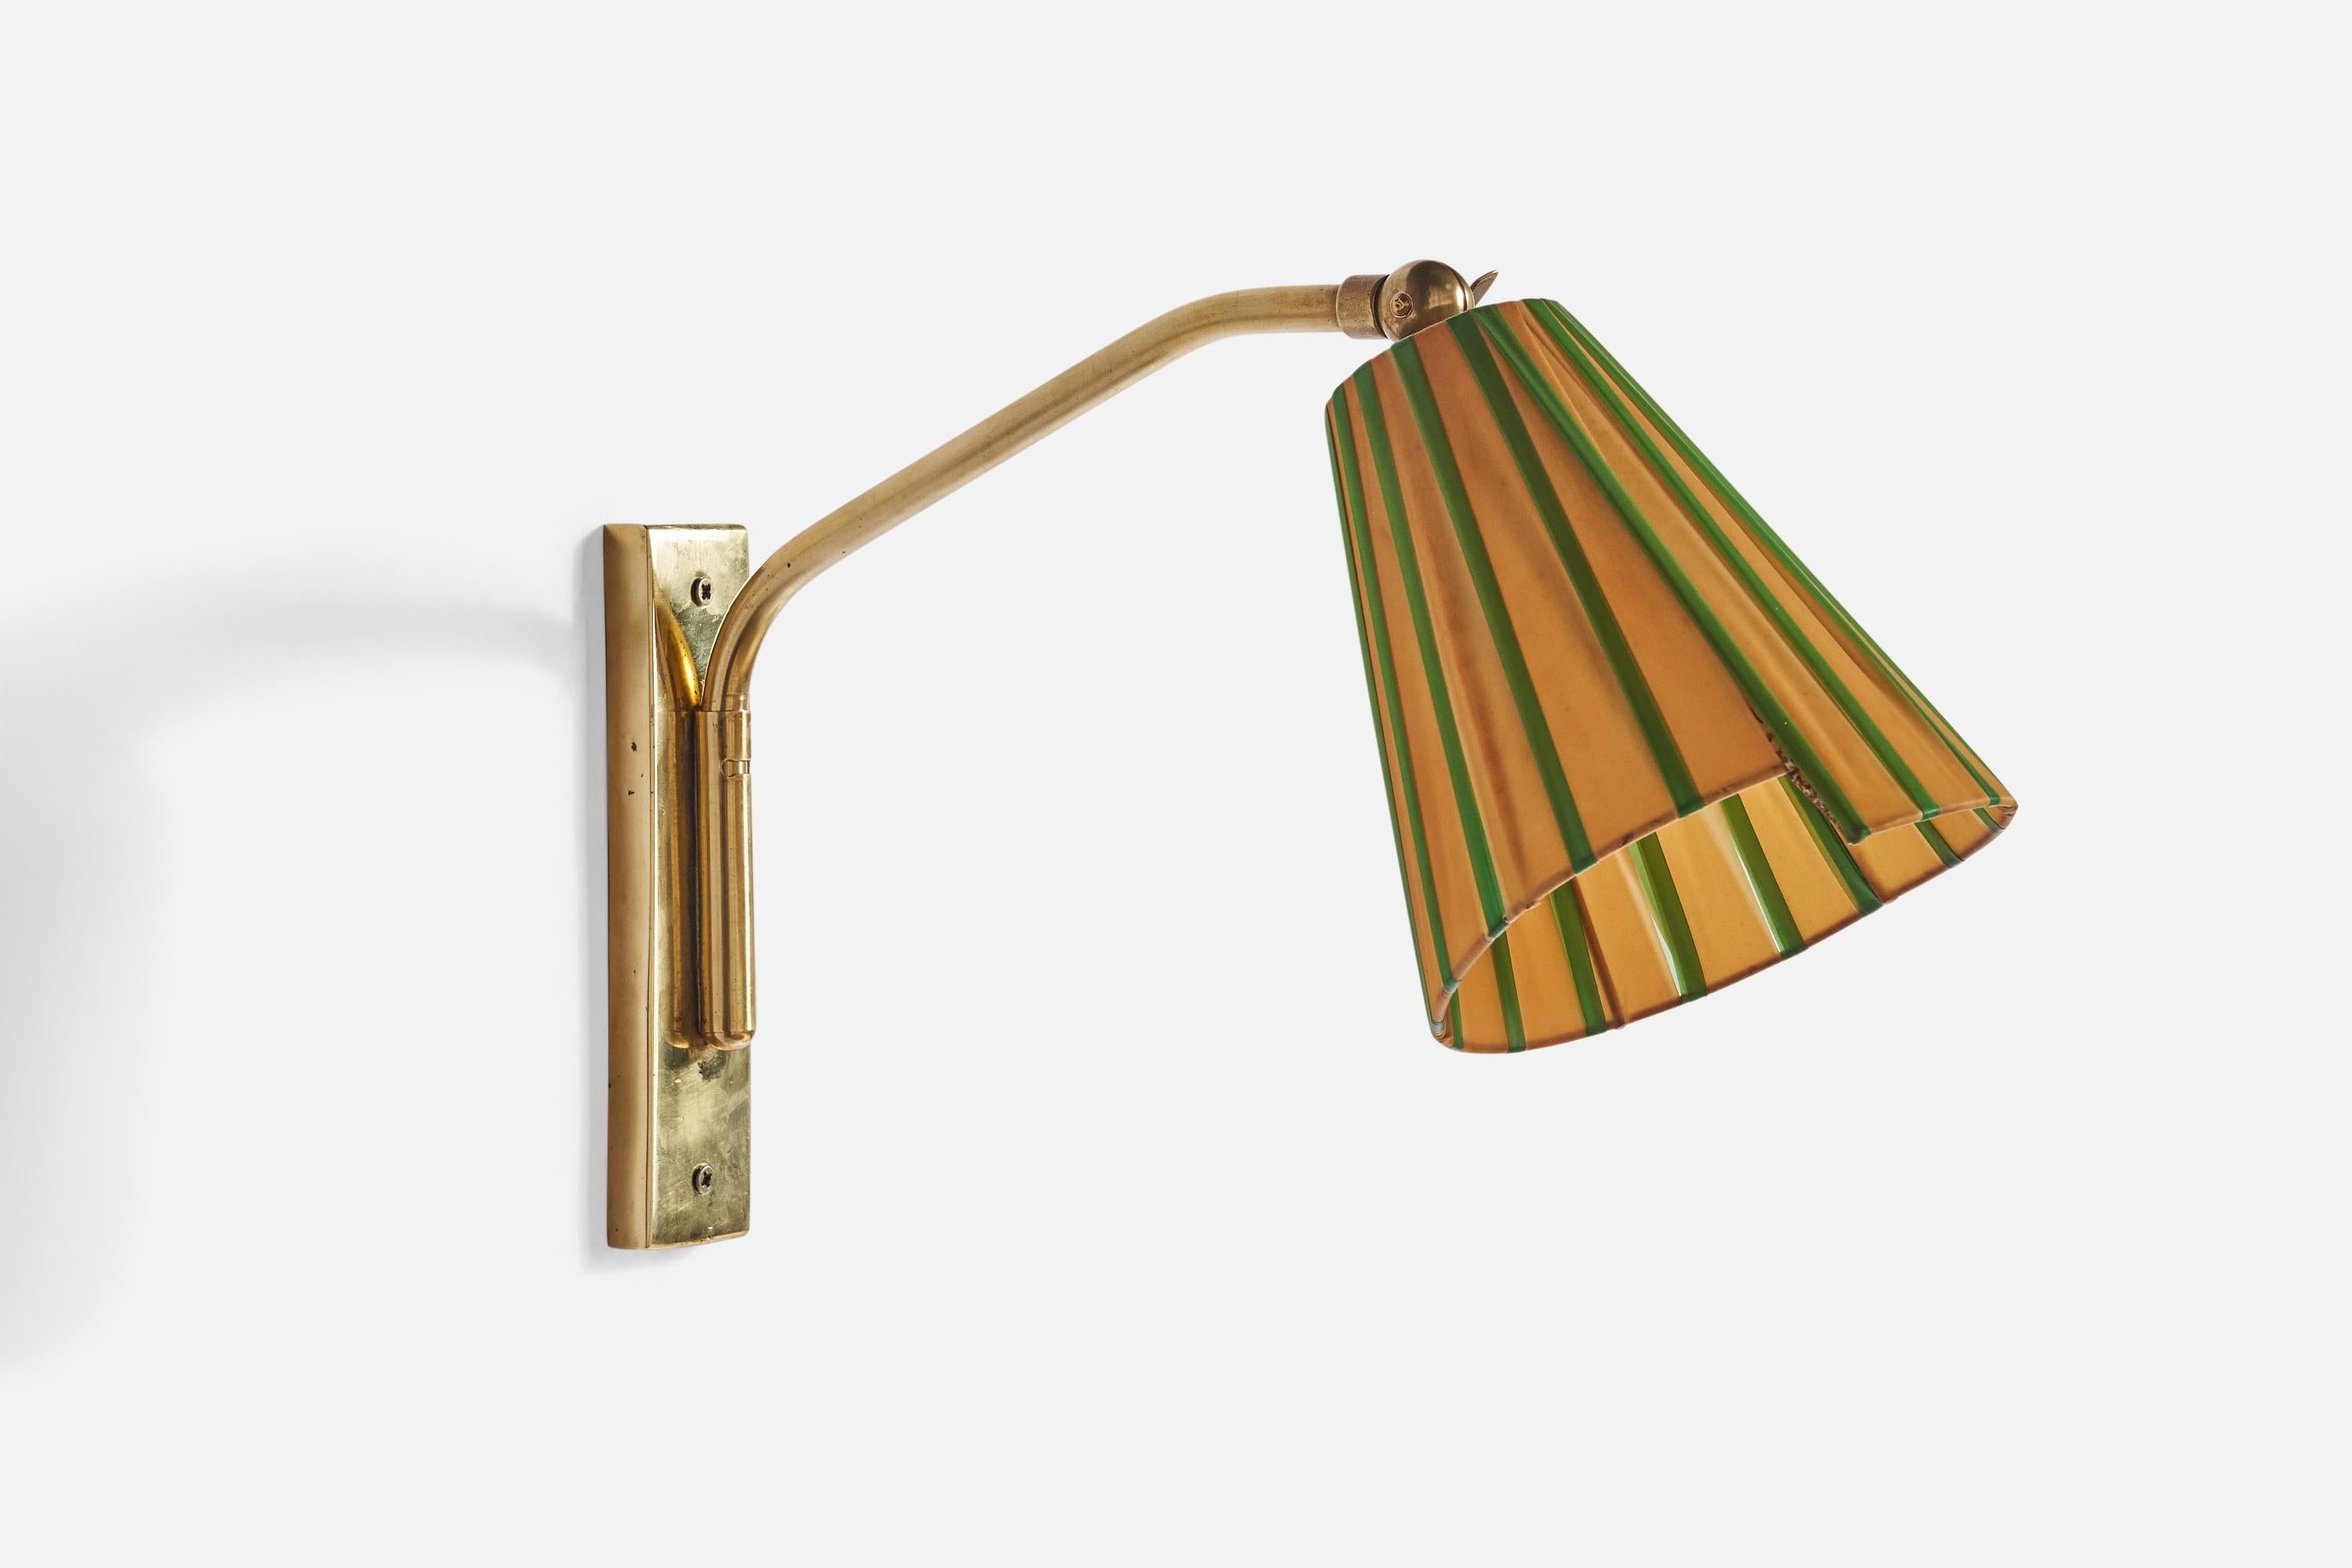 A brass and yellow and green fabric band wall light designed and produced in Austria, c. 1950s.

Overall Dimensions (inches): 7” H x 4.75”  W x 10.75” D
Back Plate Dimensions (inches): 6”  H x 1.5” W x .50” D
Bulb Specifications: E-14 Bulb
Number of